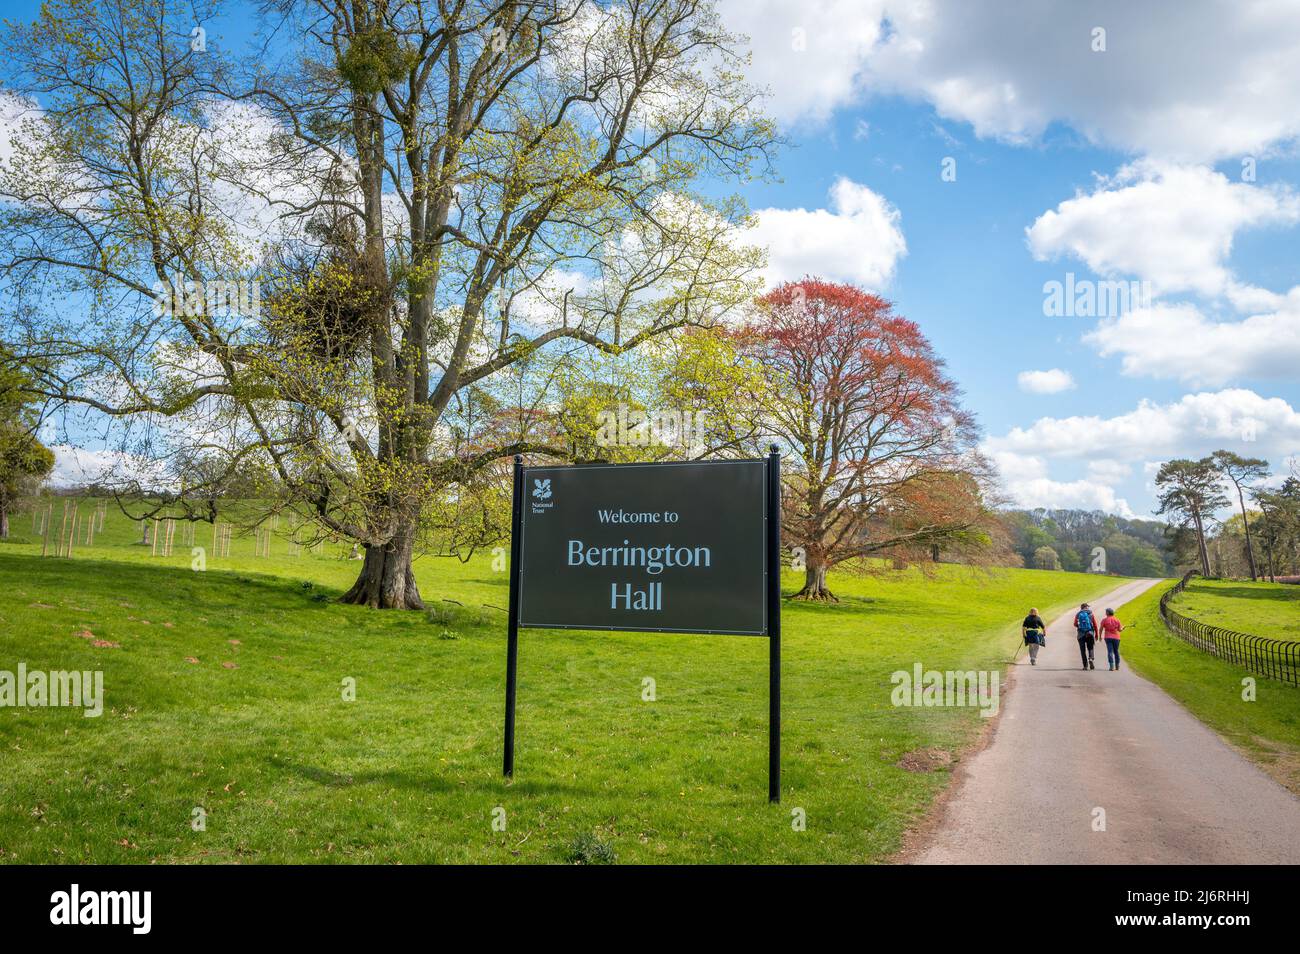 The main driveway to Berrington Hall, a national trust property, Herefordshire, England. Stock Photo